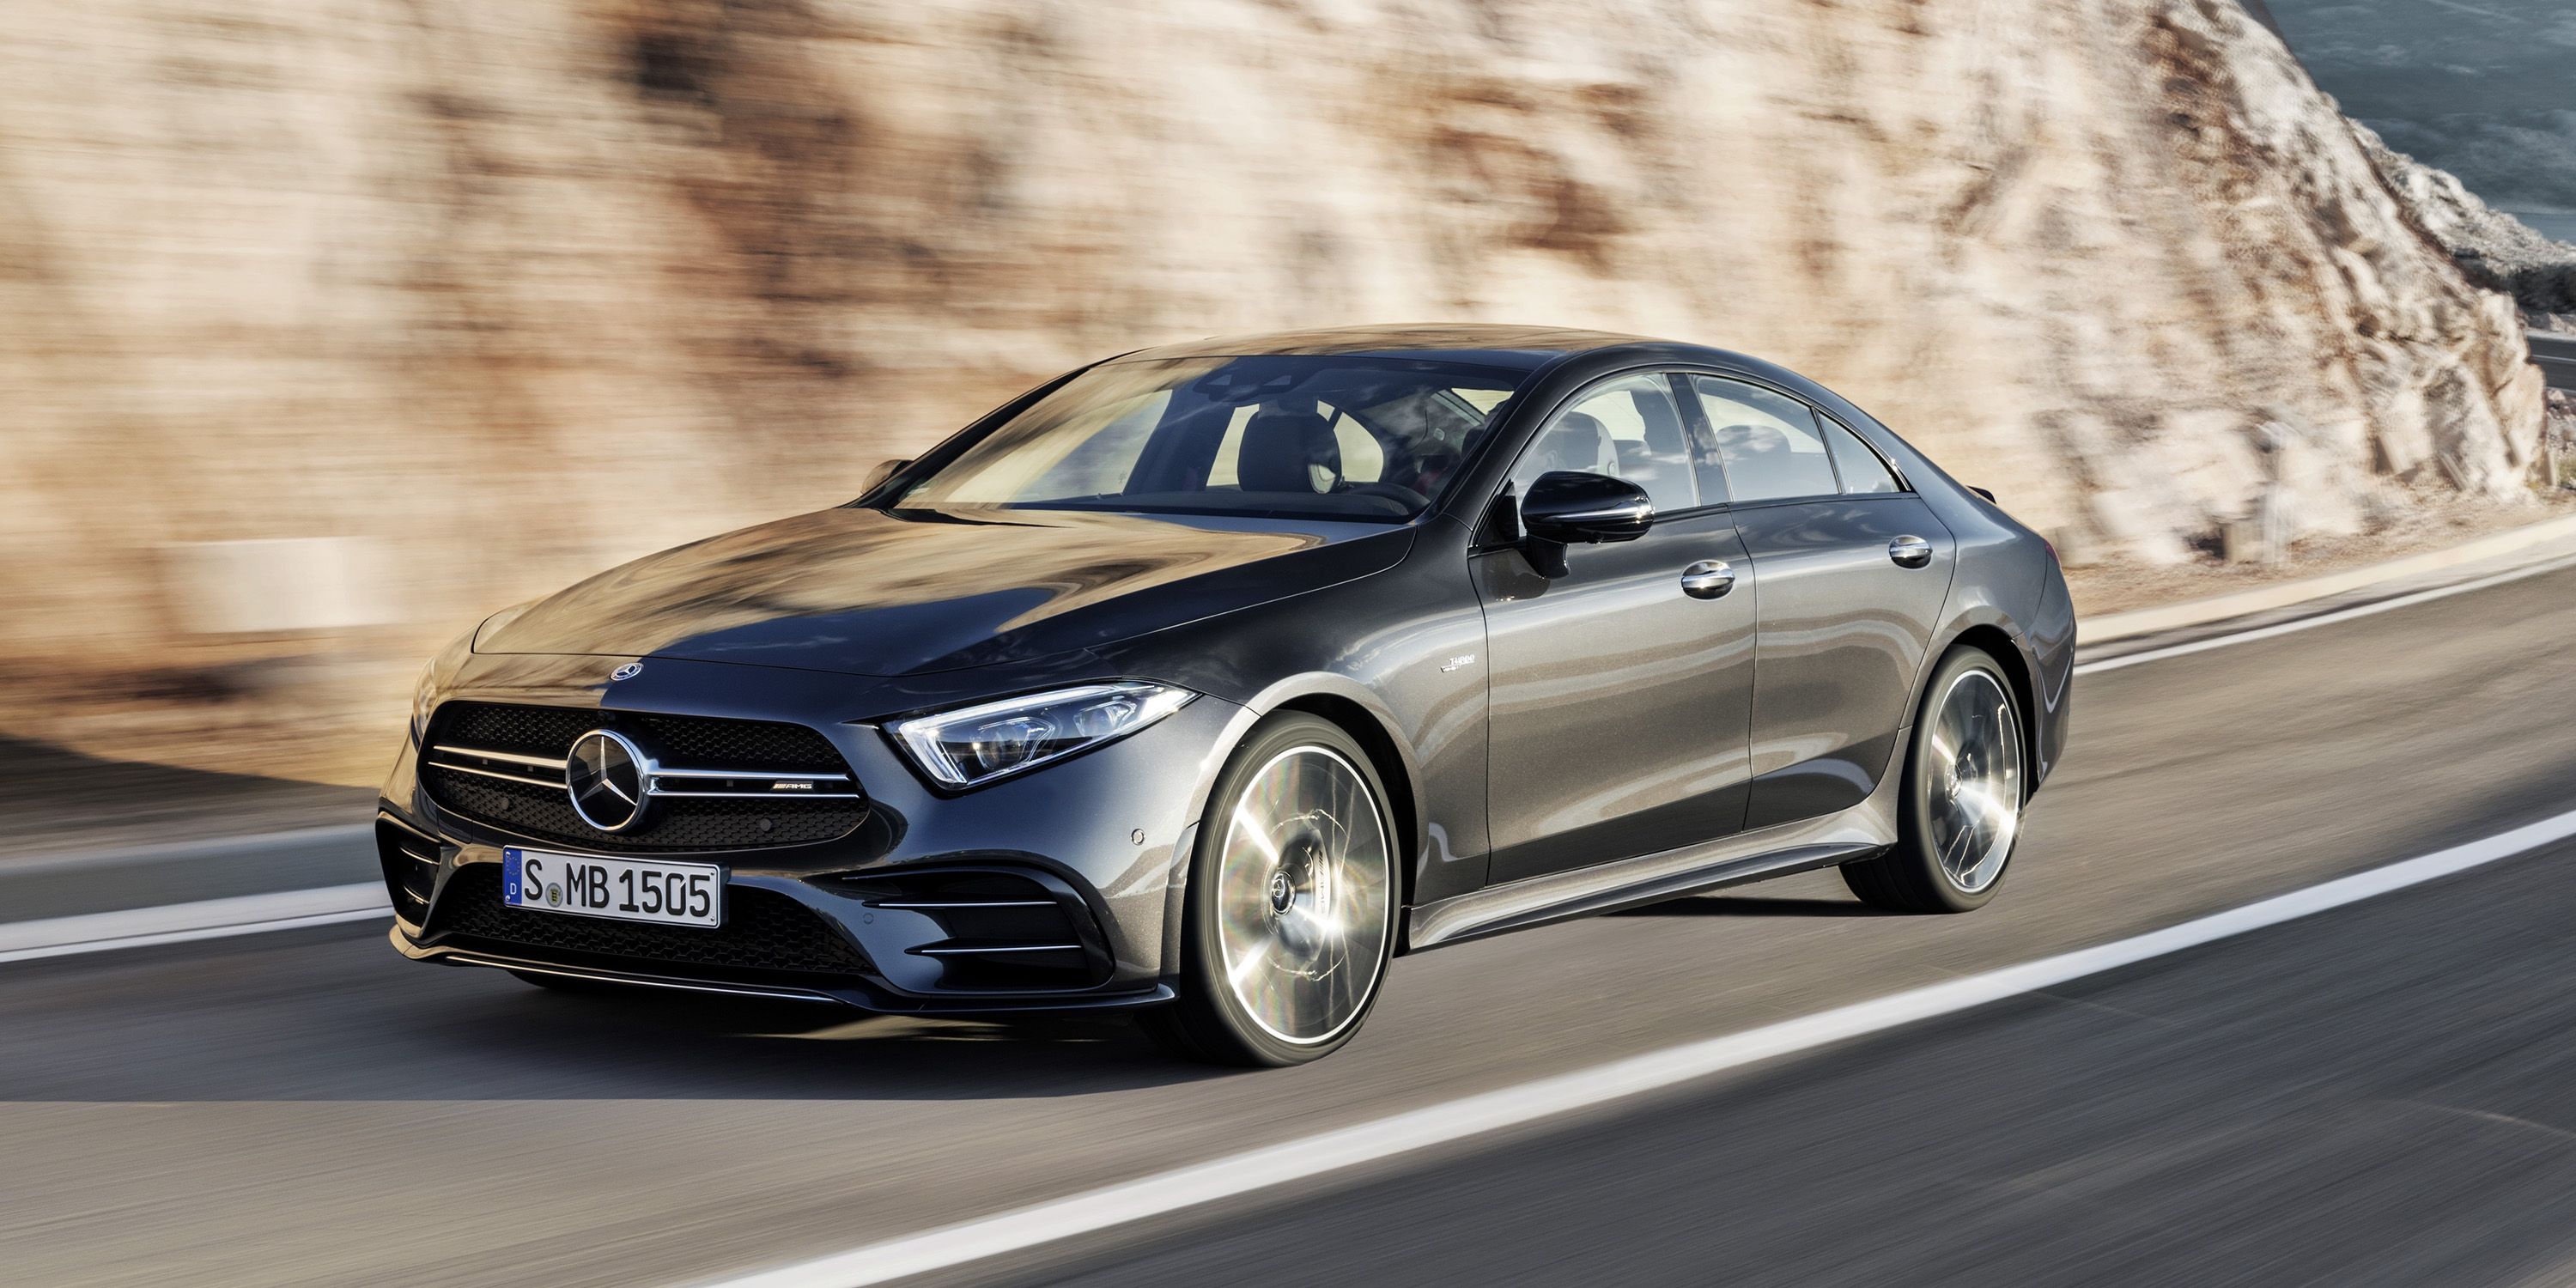 2019 Mercedes-Amg Cls53/E53 Are Officially Here - New Amg Cls And E53 Specs  Revealed At The Detroit Auto Show